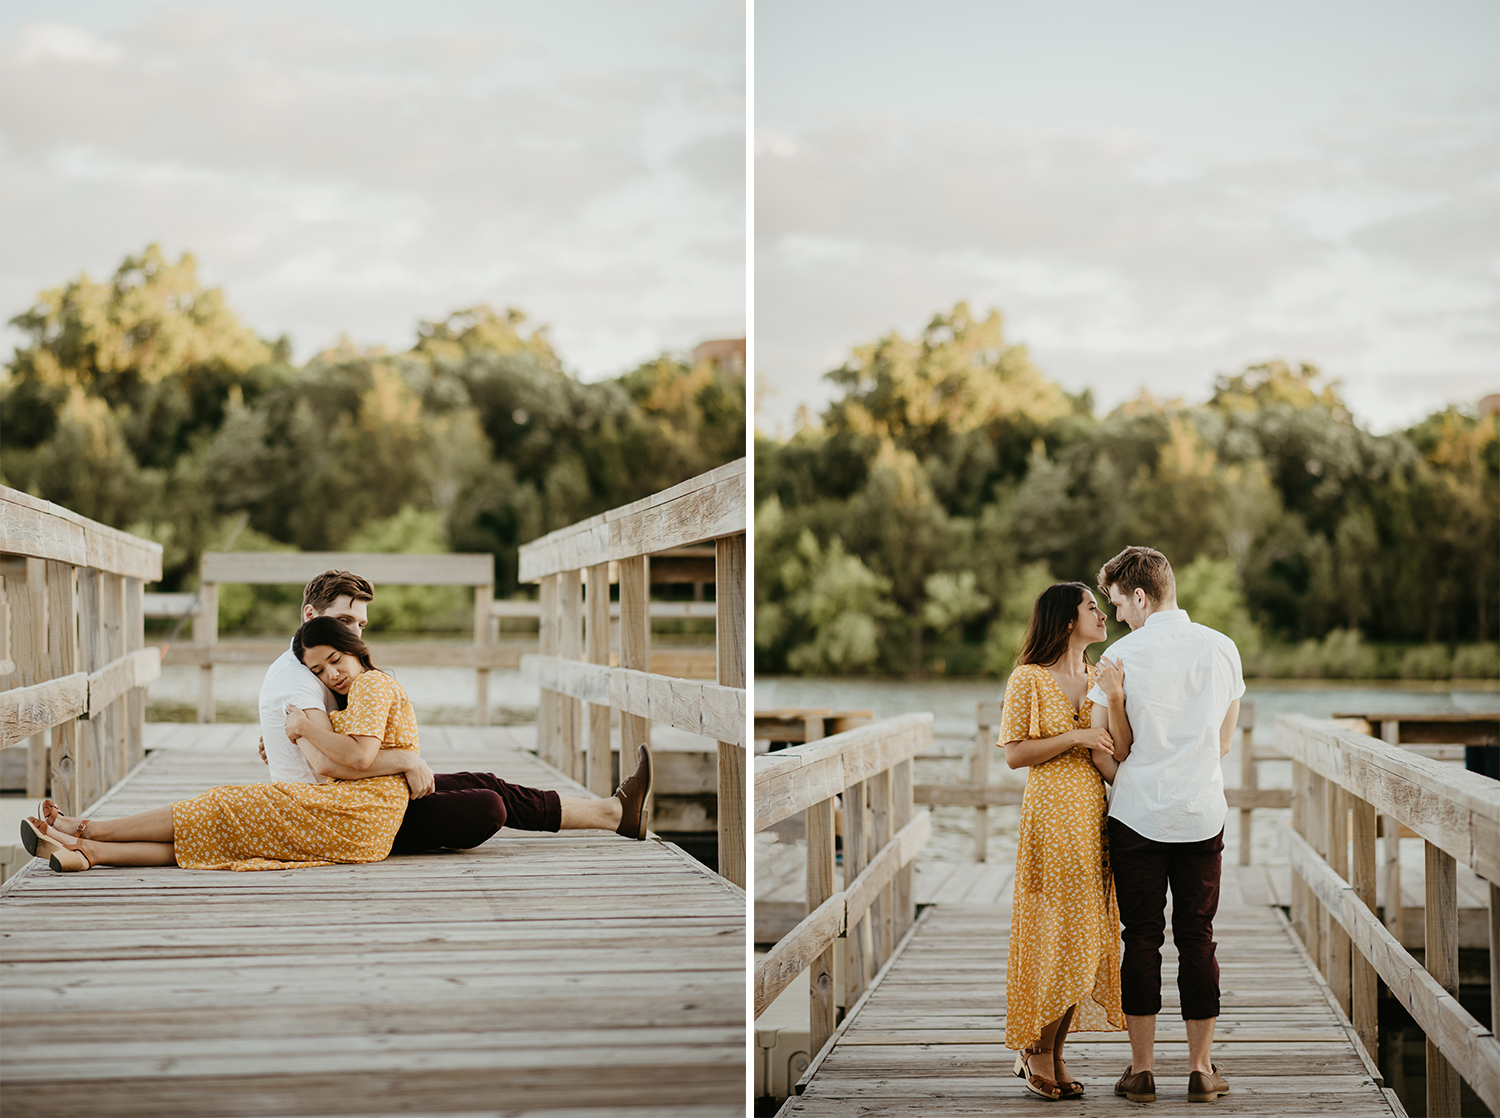 Man and woman cuddling on lakeside dock at sunset